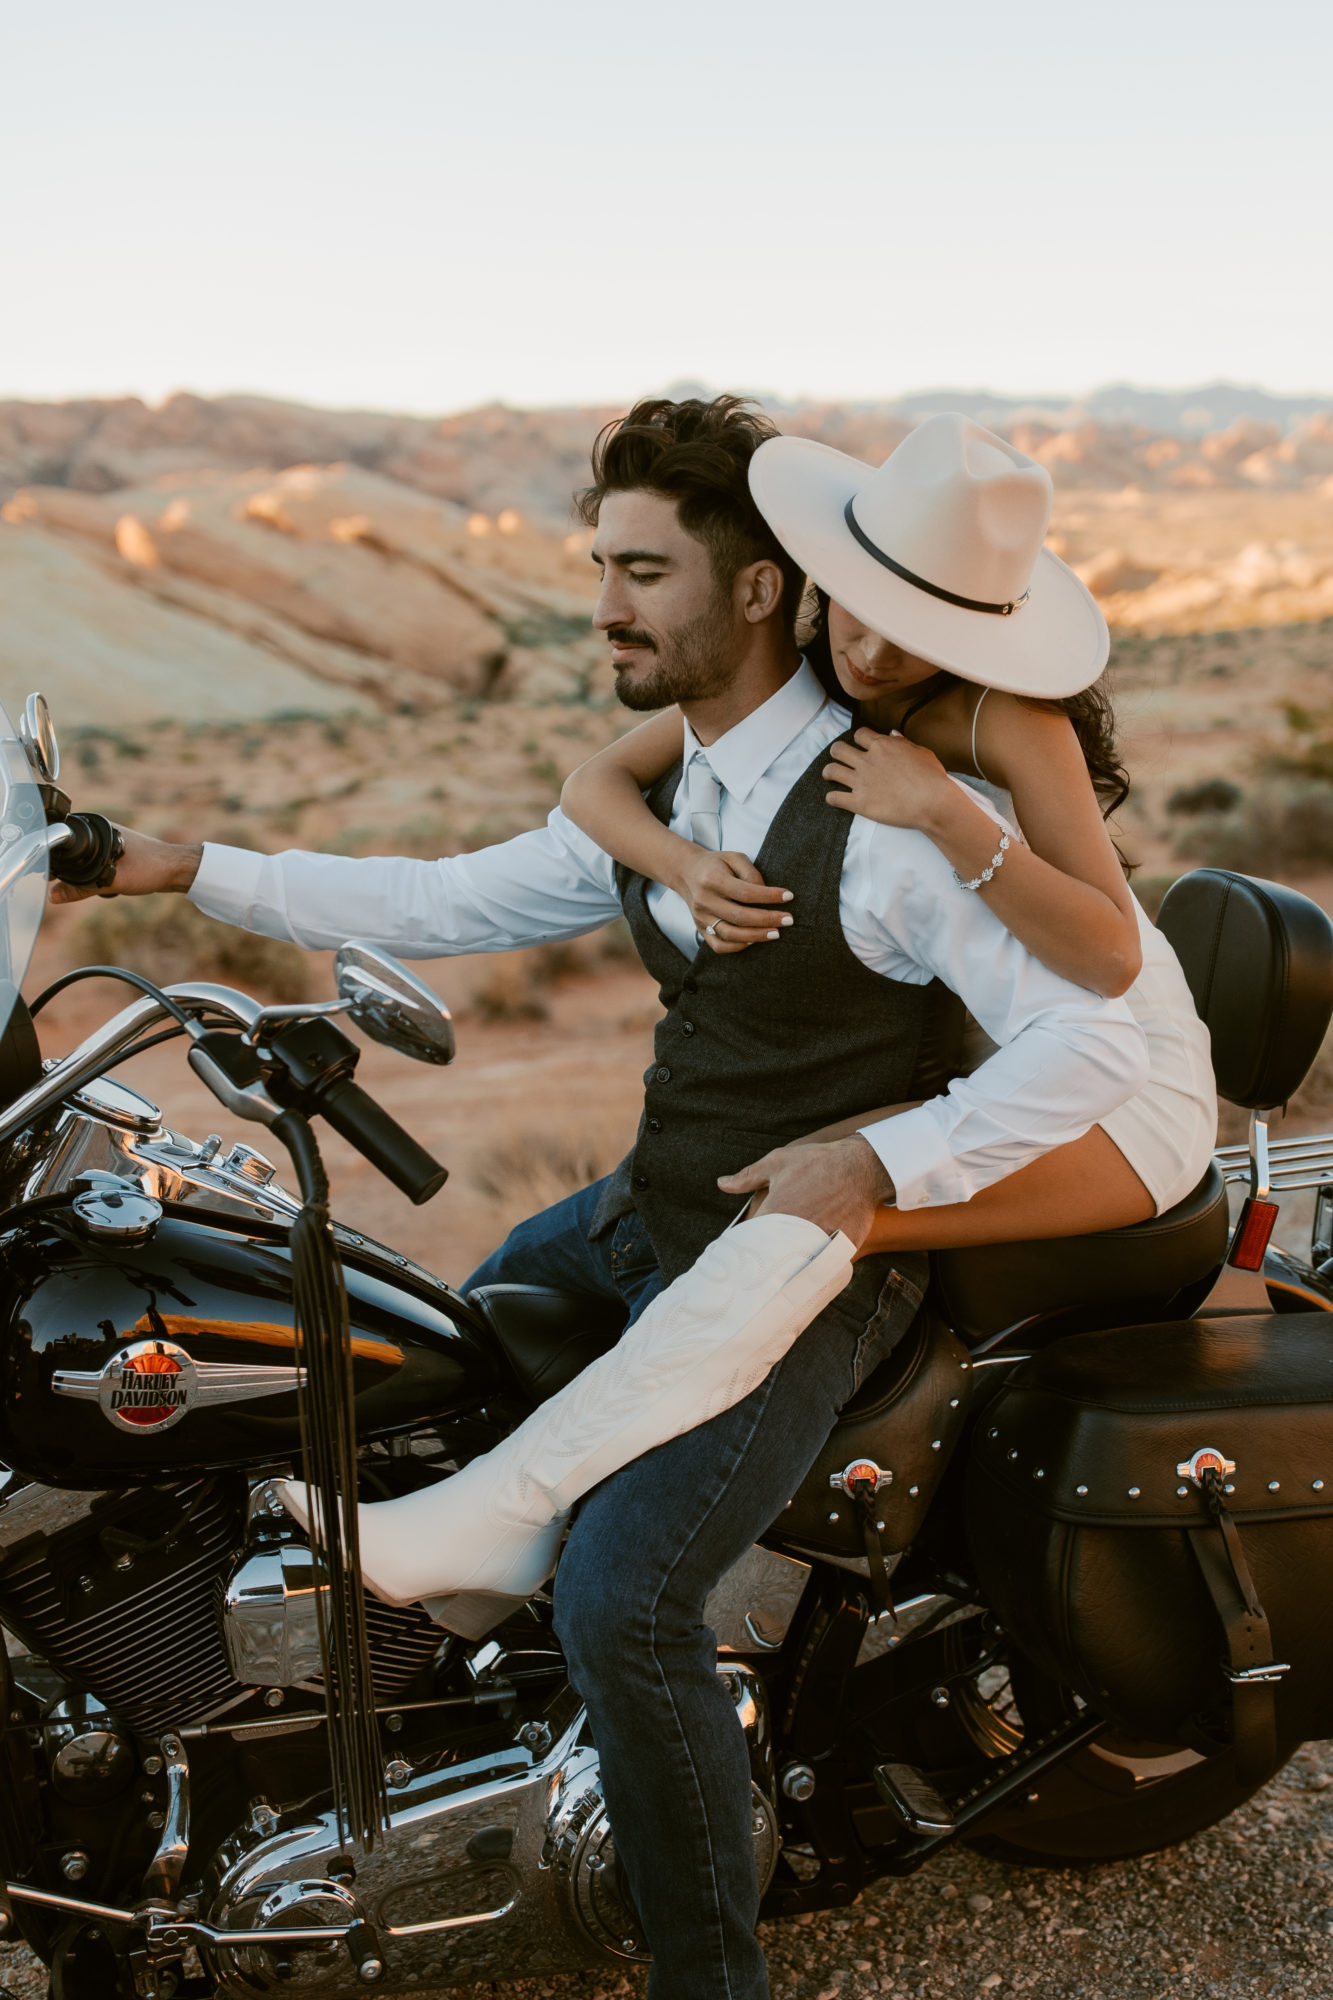 How To Apply For A Commercial Photography Permit At The Valley Of Fire l Adventure Elopement Photographer